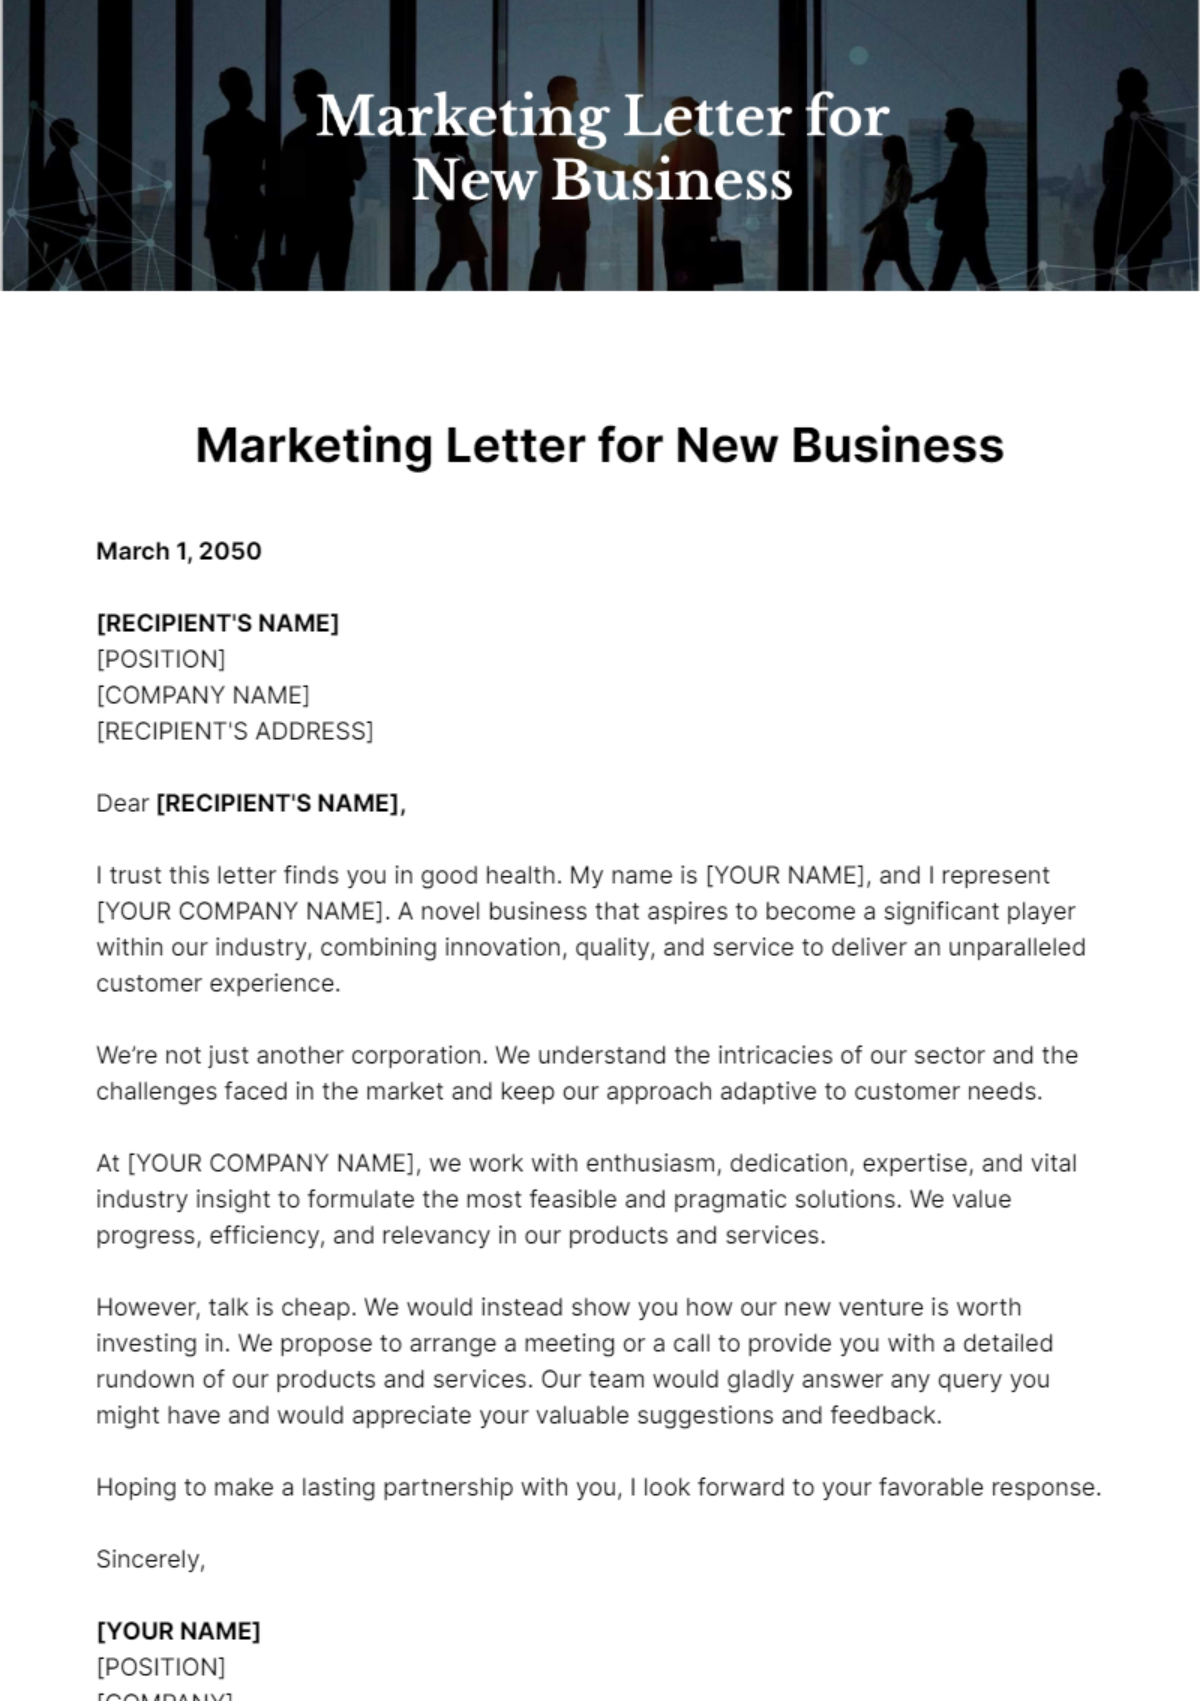 Free Marketing Letter for New Business Template